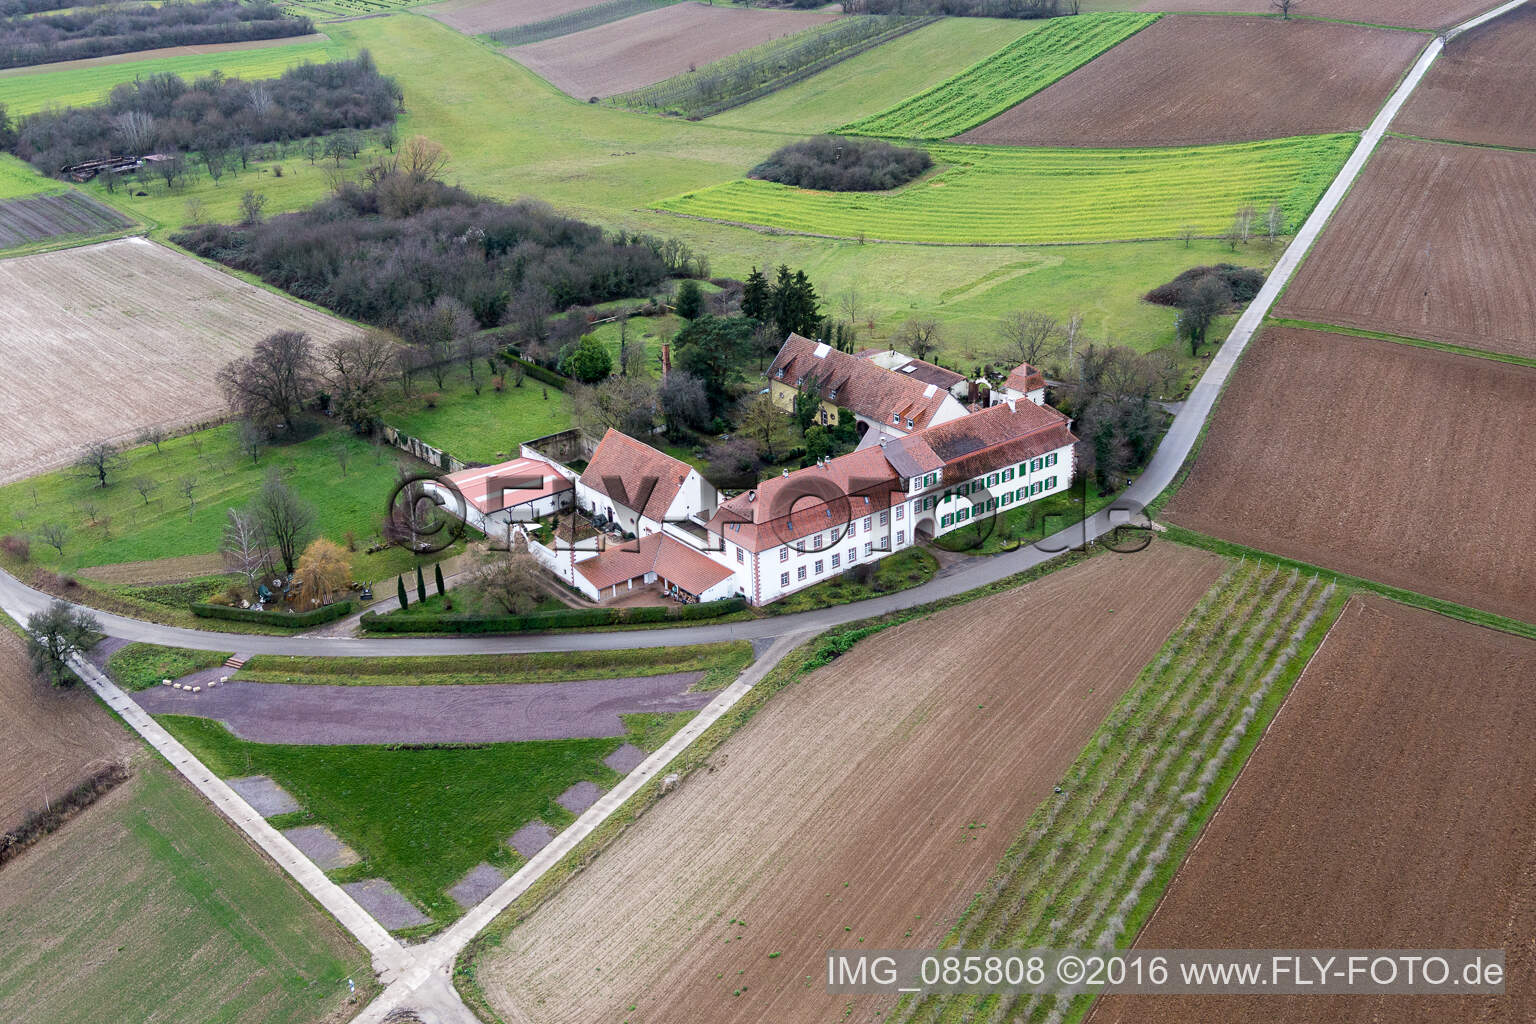 Workshop for Assisted Living of hidden Talents GmbH in the district Haftelhof in Schweighofen in the state Rhineland-Palatinate, Germany out of the air